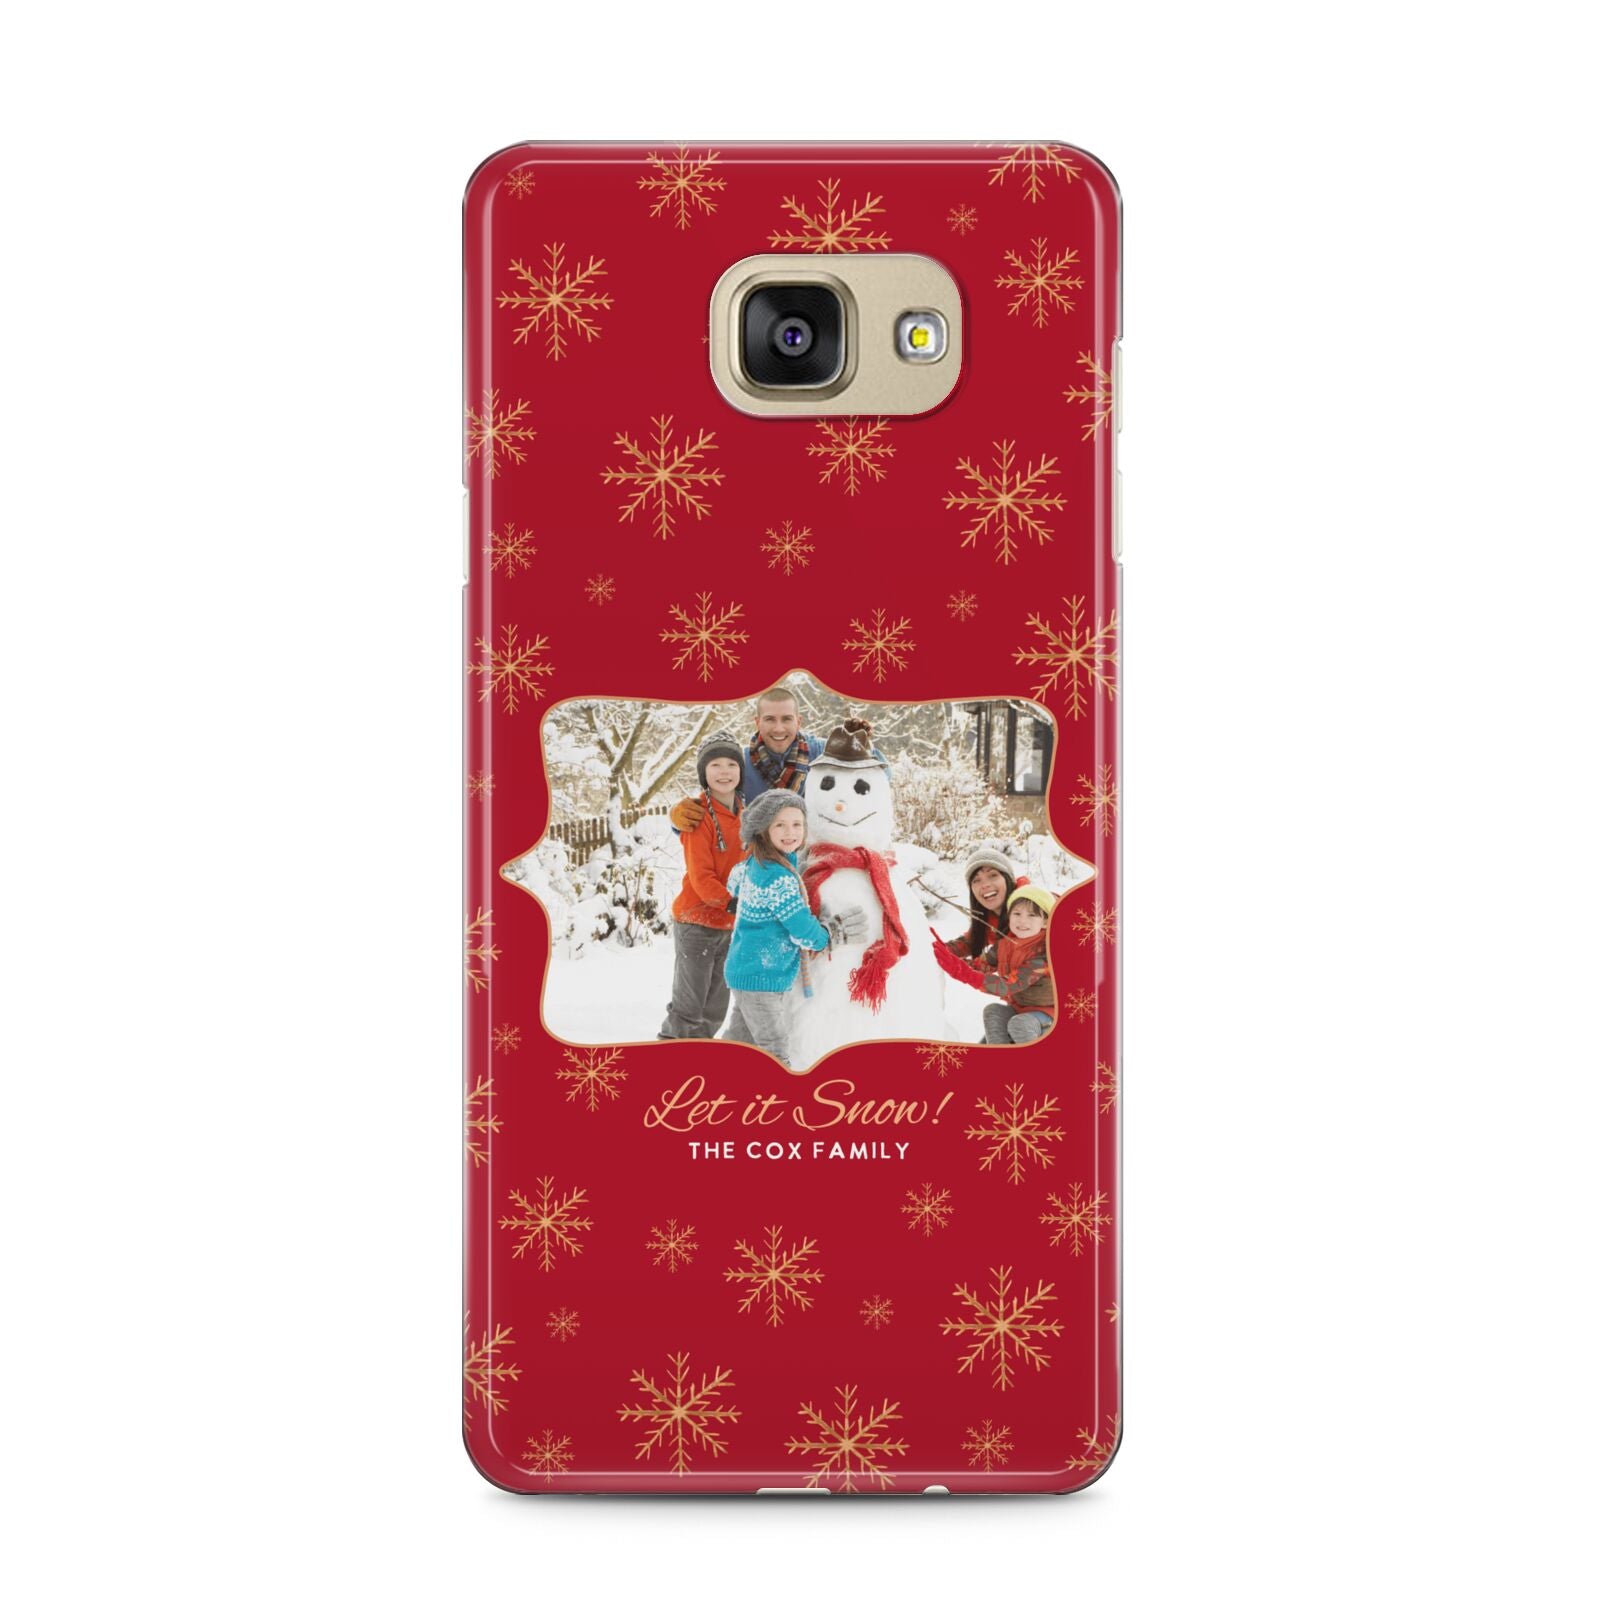 Let it Snow Christmas Photo Upload Samsung Galaxy A5 2016 Case on gold phone